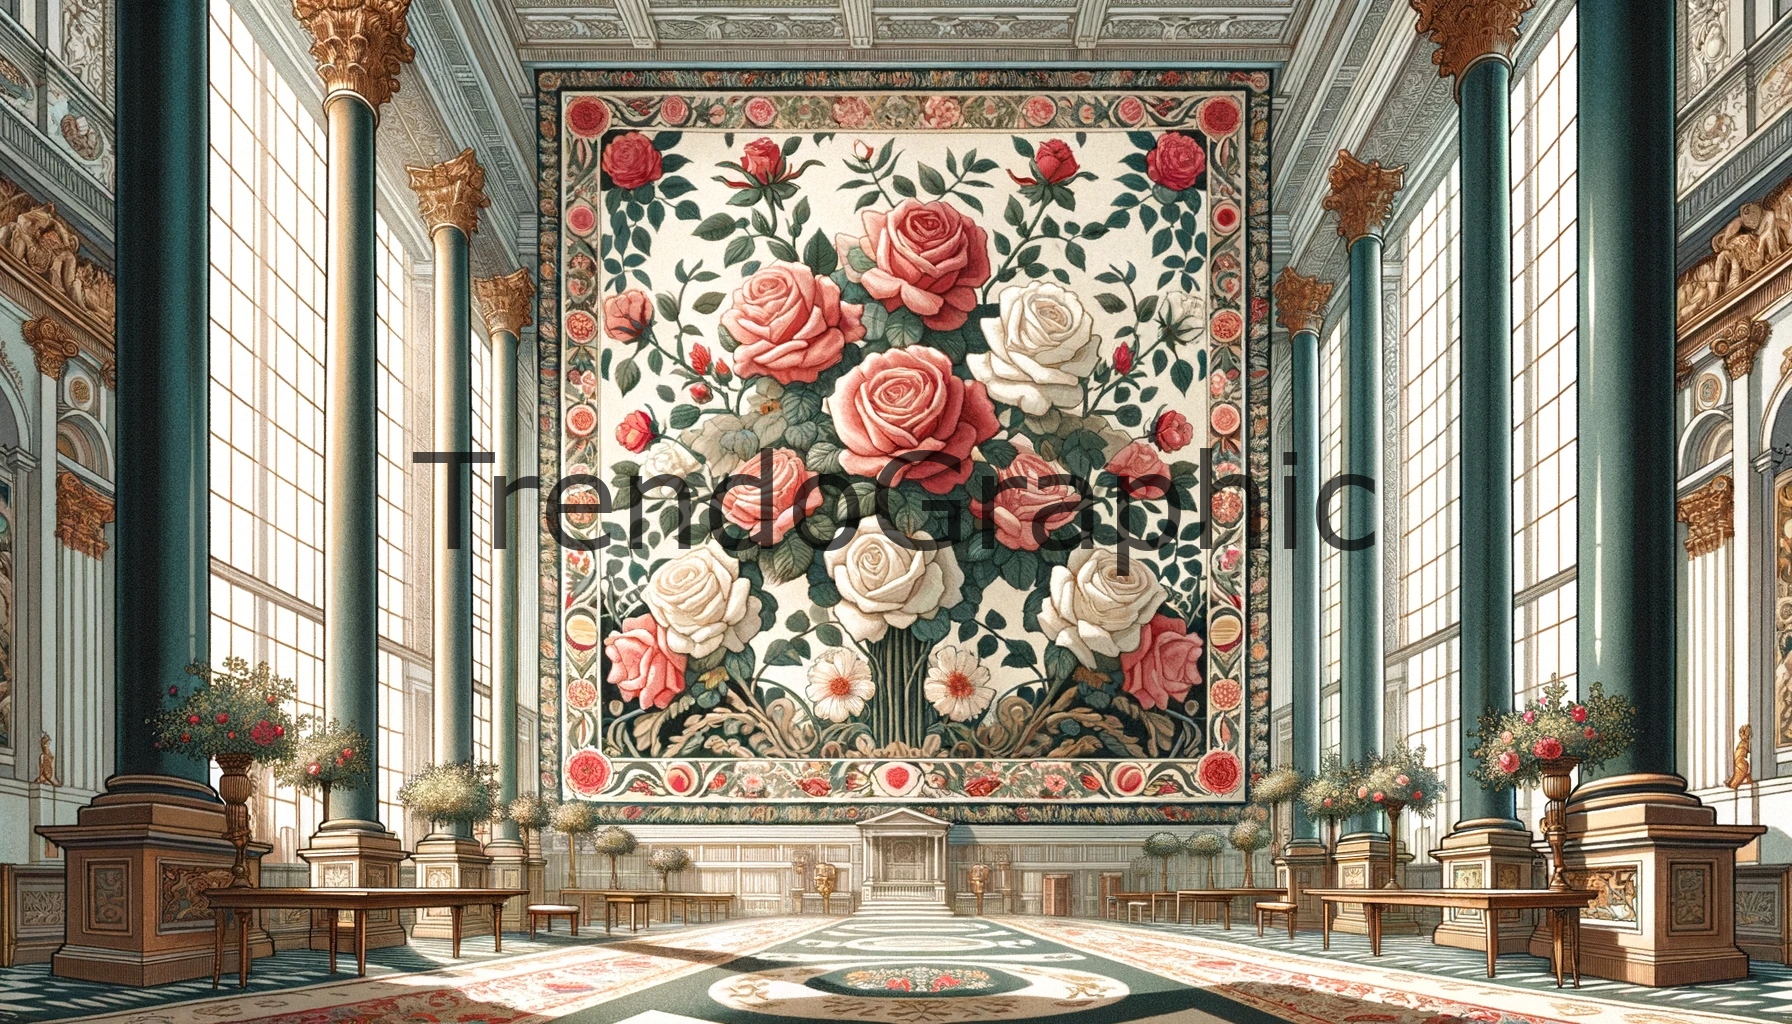 Elegant Rose-Themed Tapestry in Grand Hall: A Visual Masterpiece